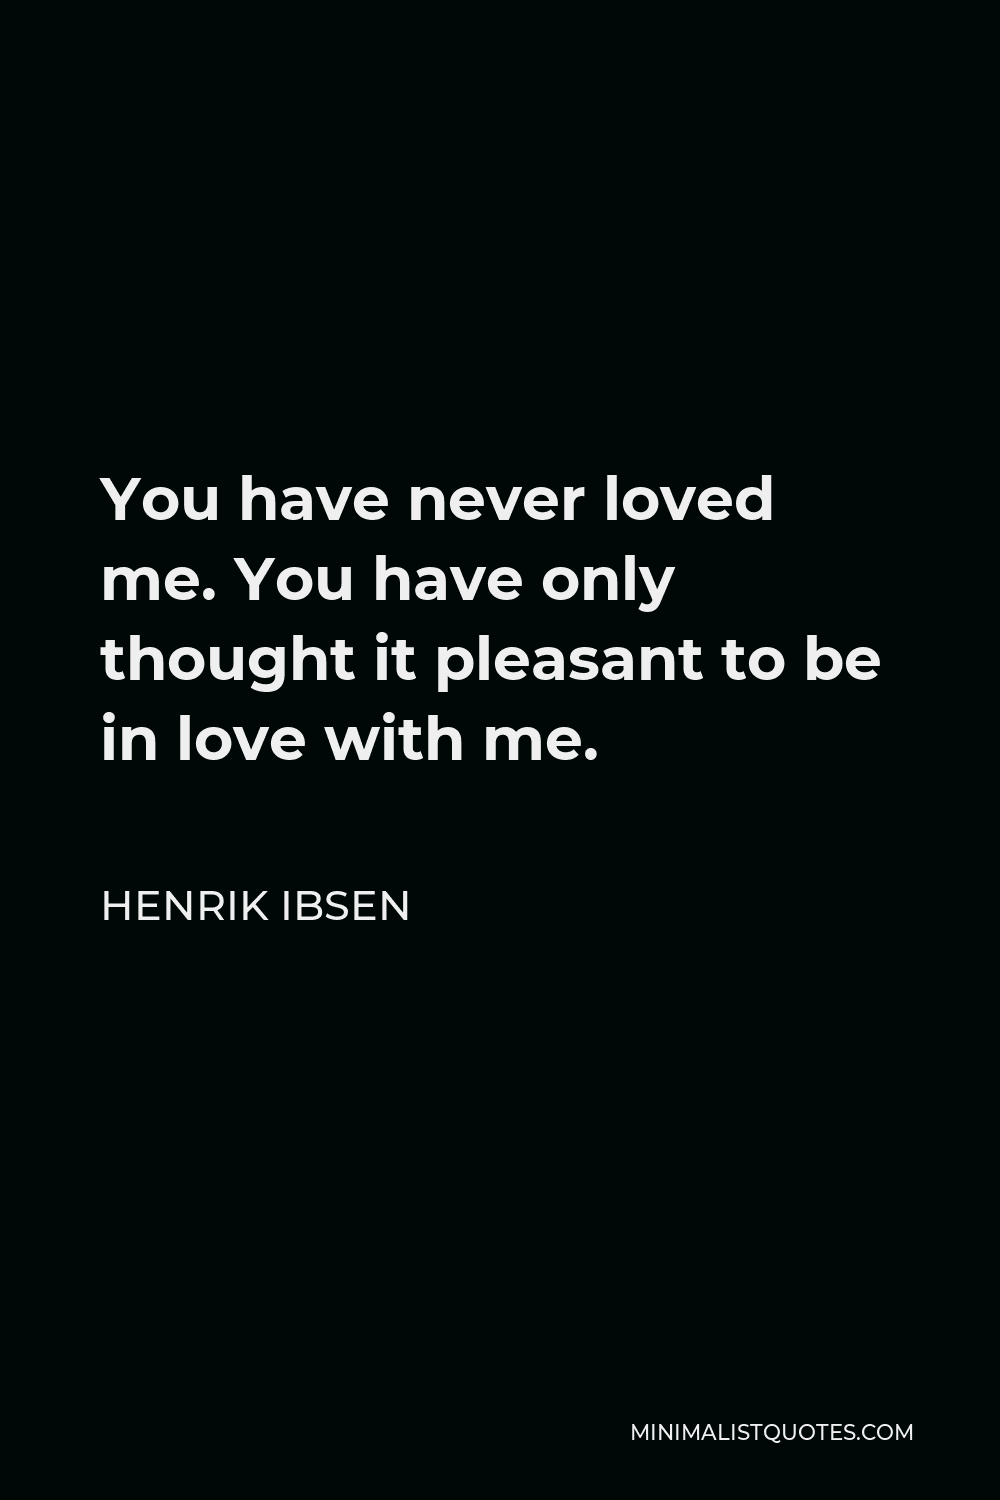 Henrik Ibsen Quote - You have never loved me. You have only thought it pleasant to be in love with me.